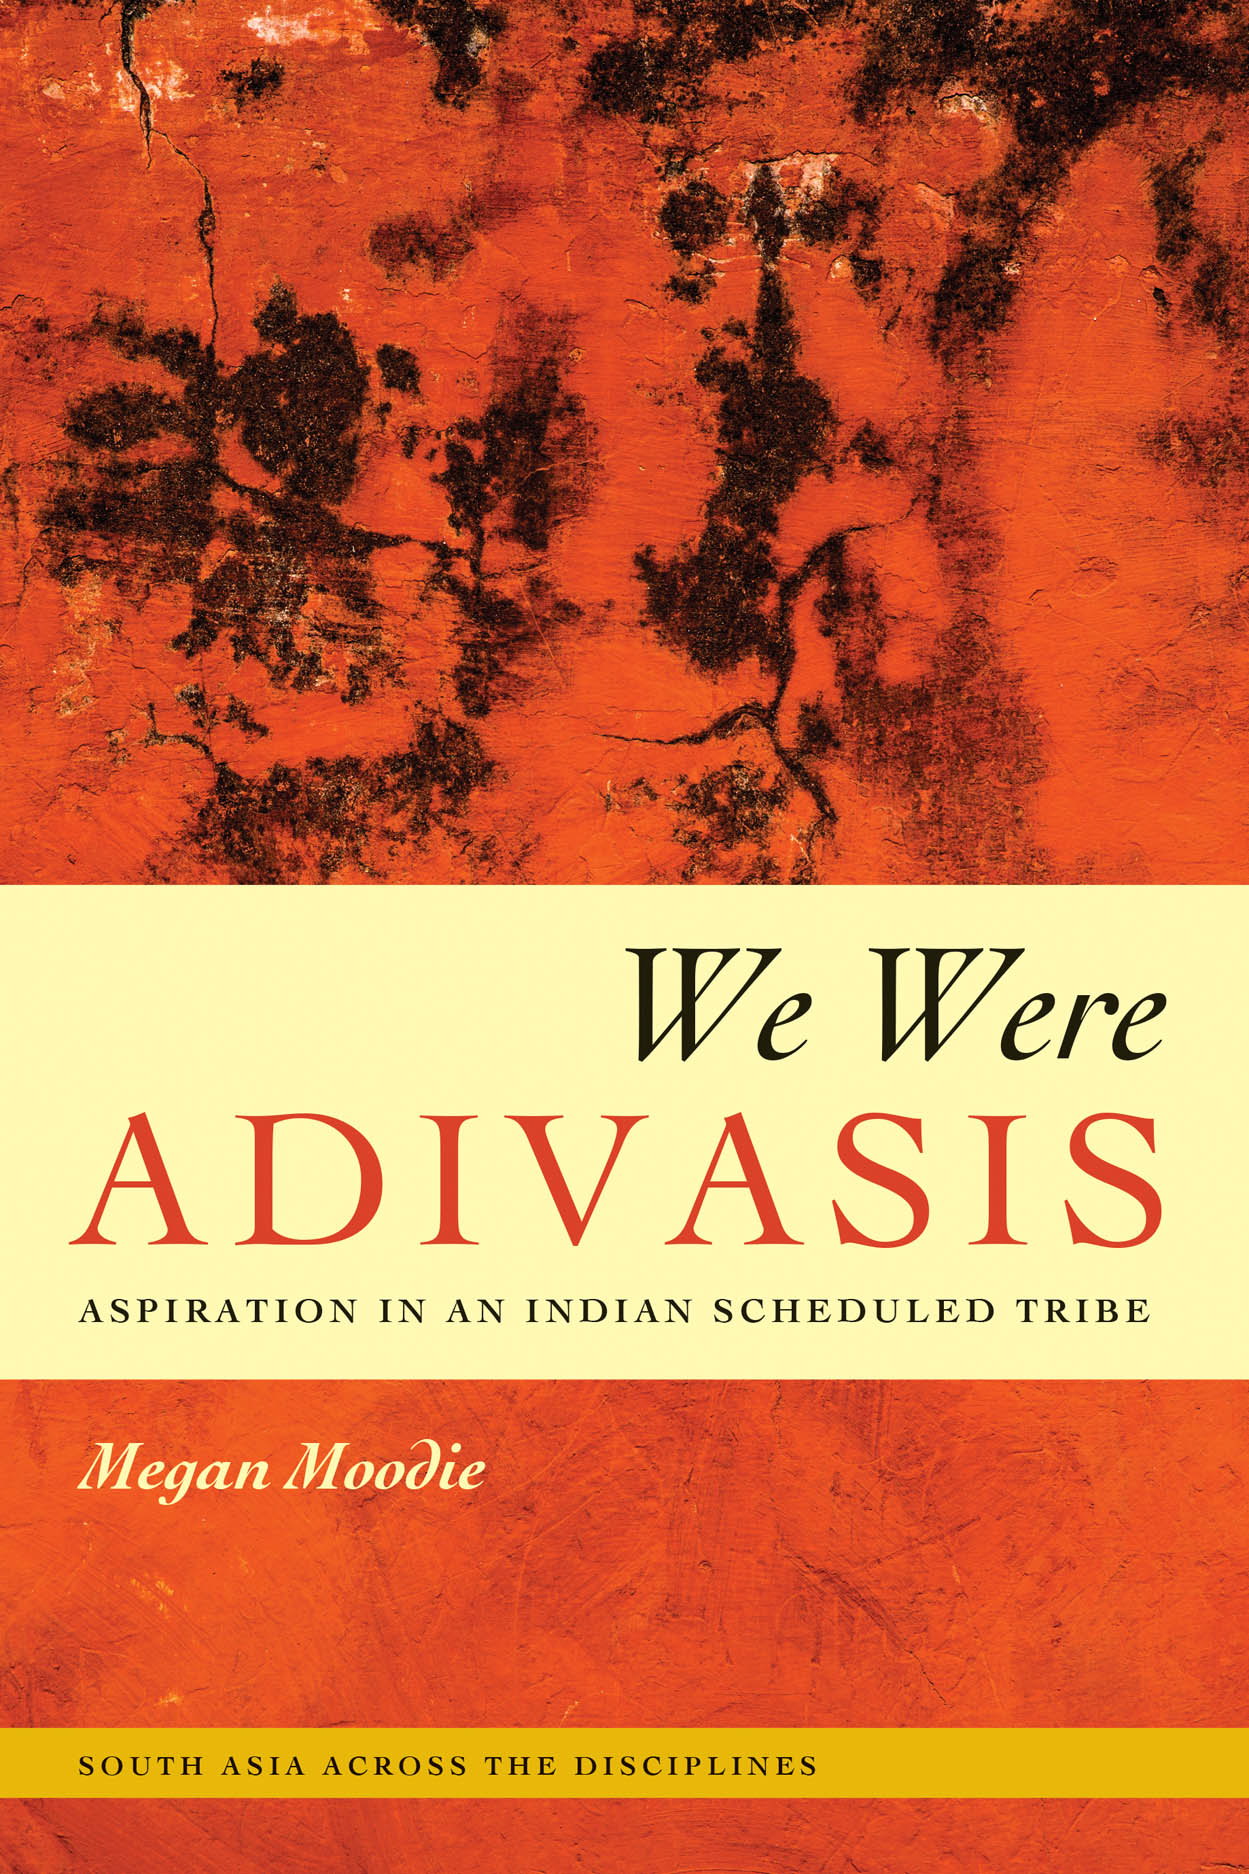 Why the Adivasis Must Seek to Redefine Themselves